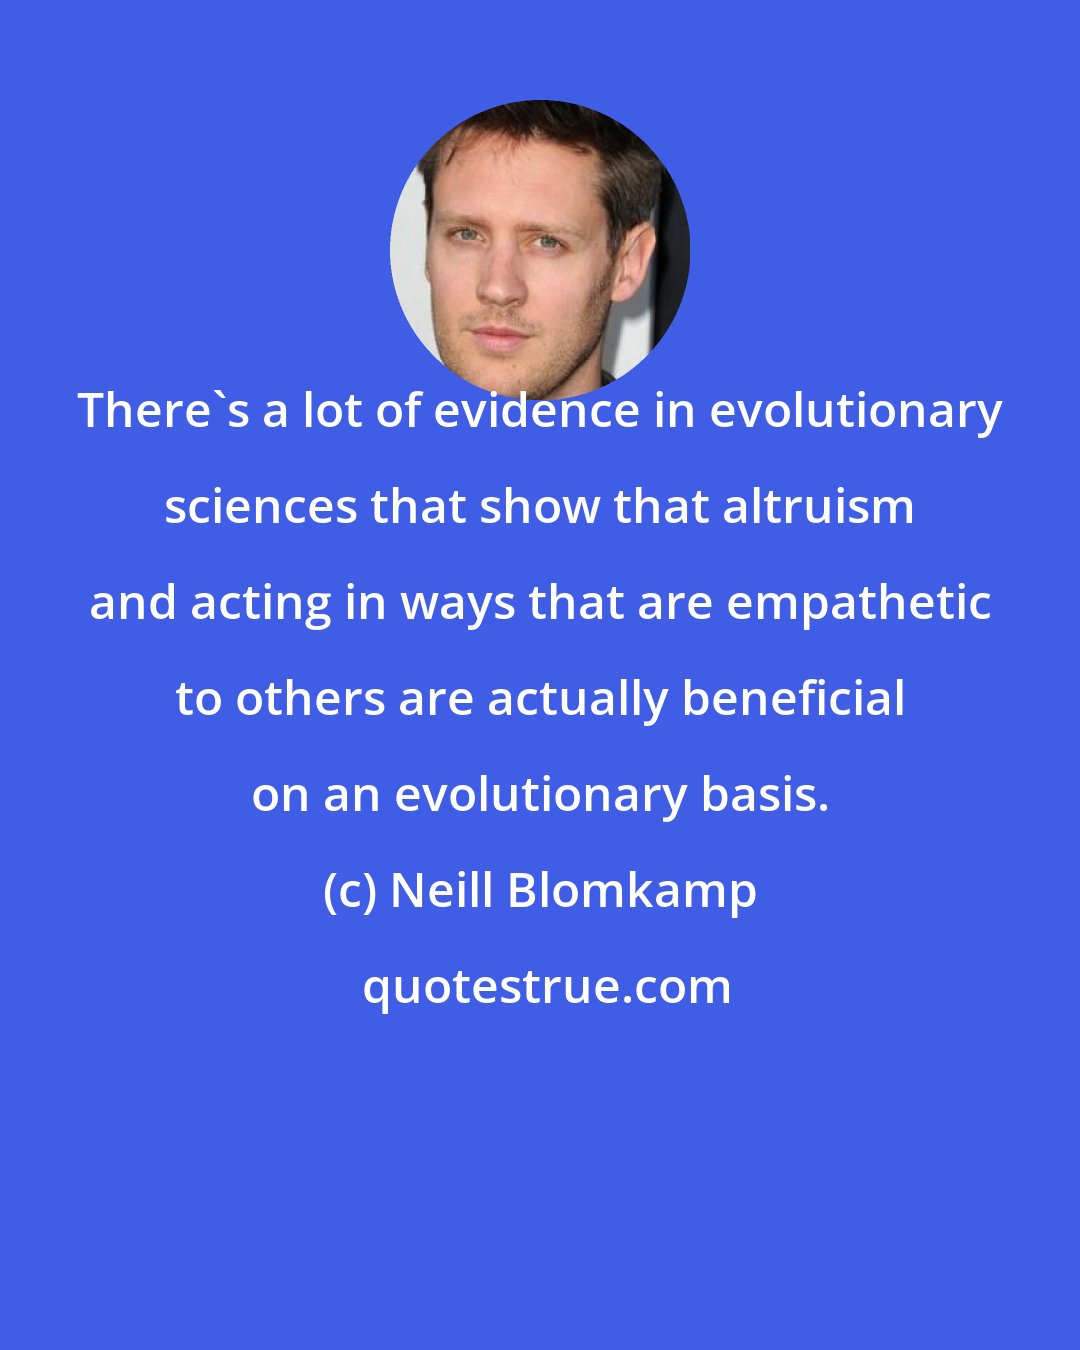 Neill Blomkamp: There's a lot of evidence in evolutionary sciences that show that altruism and acting in ways that are empathetic to others are actually beneficial on an evolutionary basis.